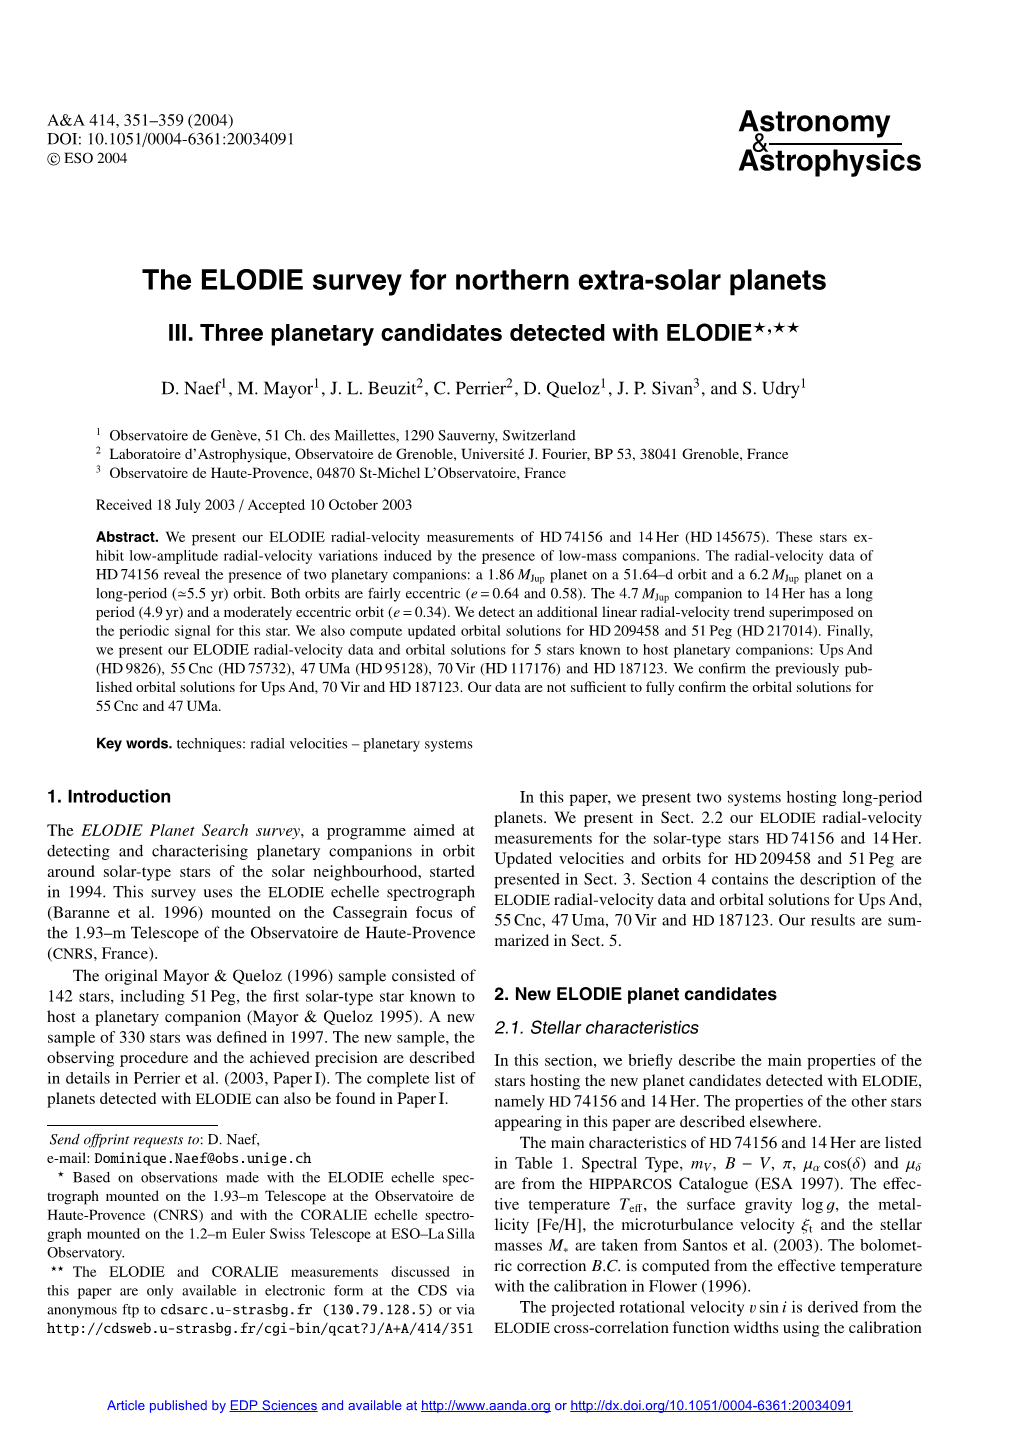 The ELODIE Survey for Northern Extra-Solar Planets